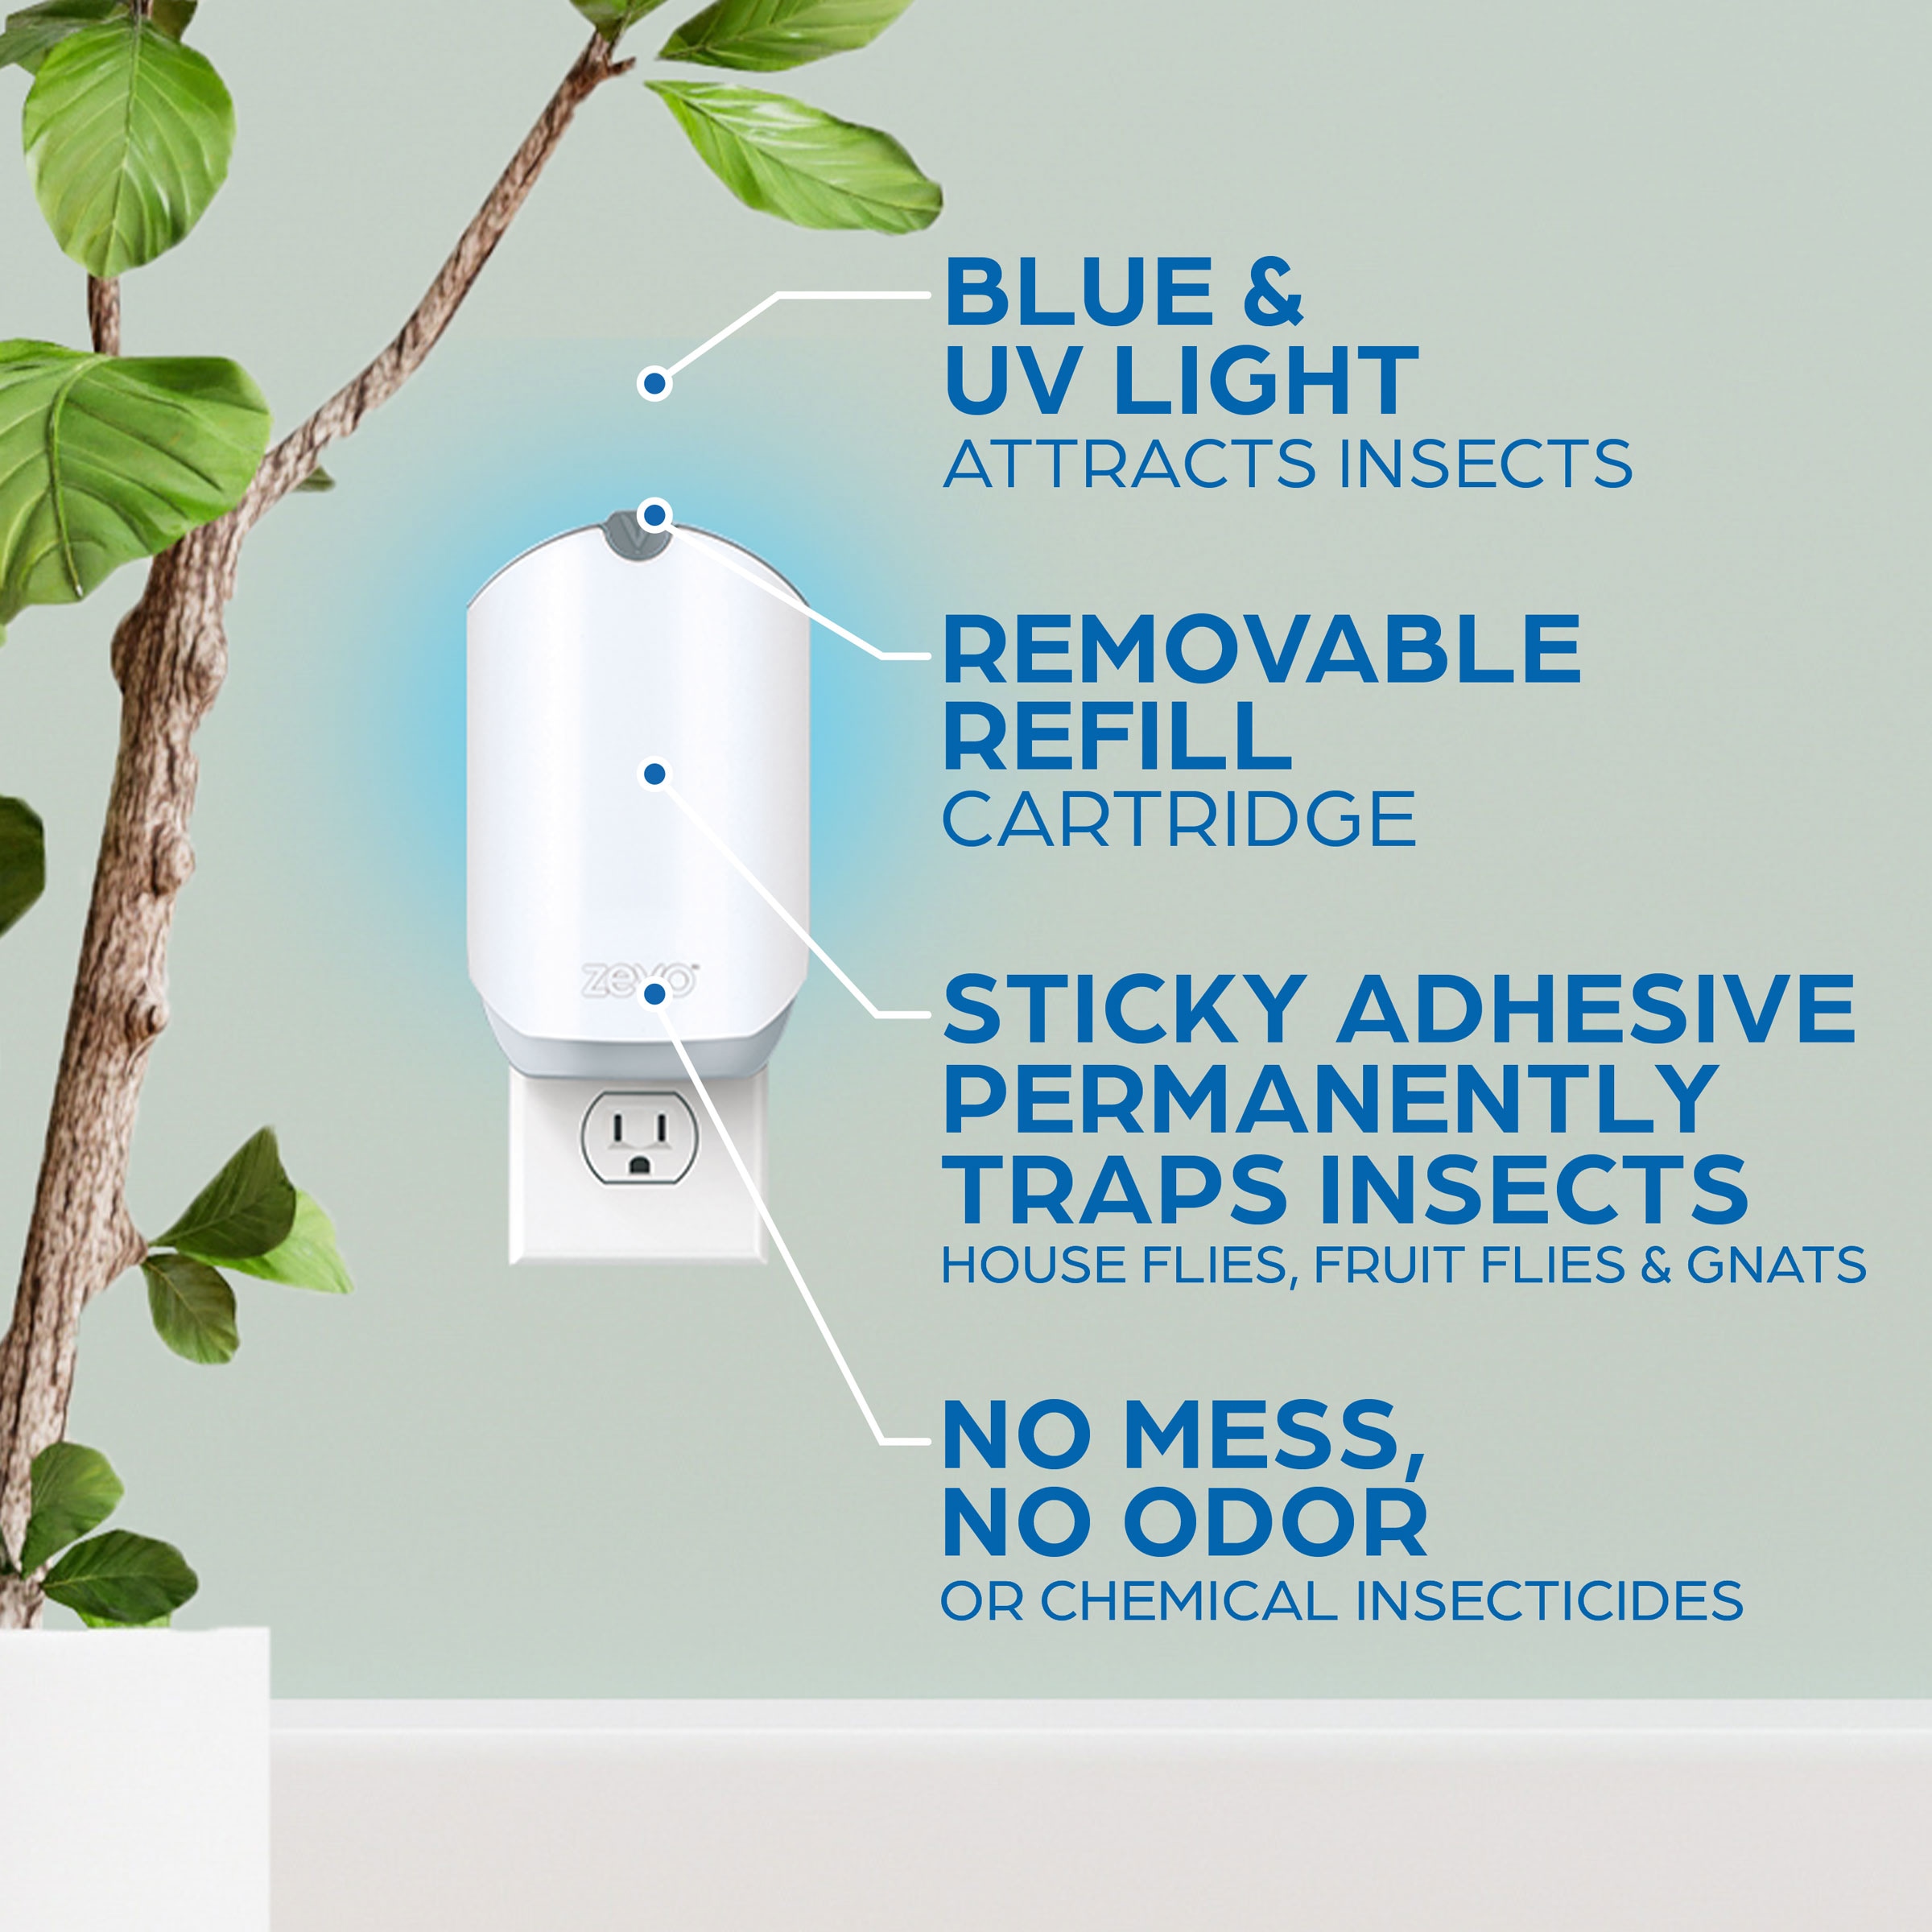 Zevo M4 Insect Trap for Indoor/Outdoor Use - Eliminates Flies, Gnats,  Mosquitos, and More - Blue UV Light Attracts and Traps Flying Insects